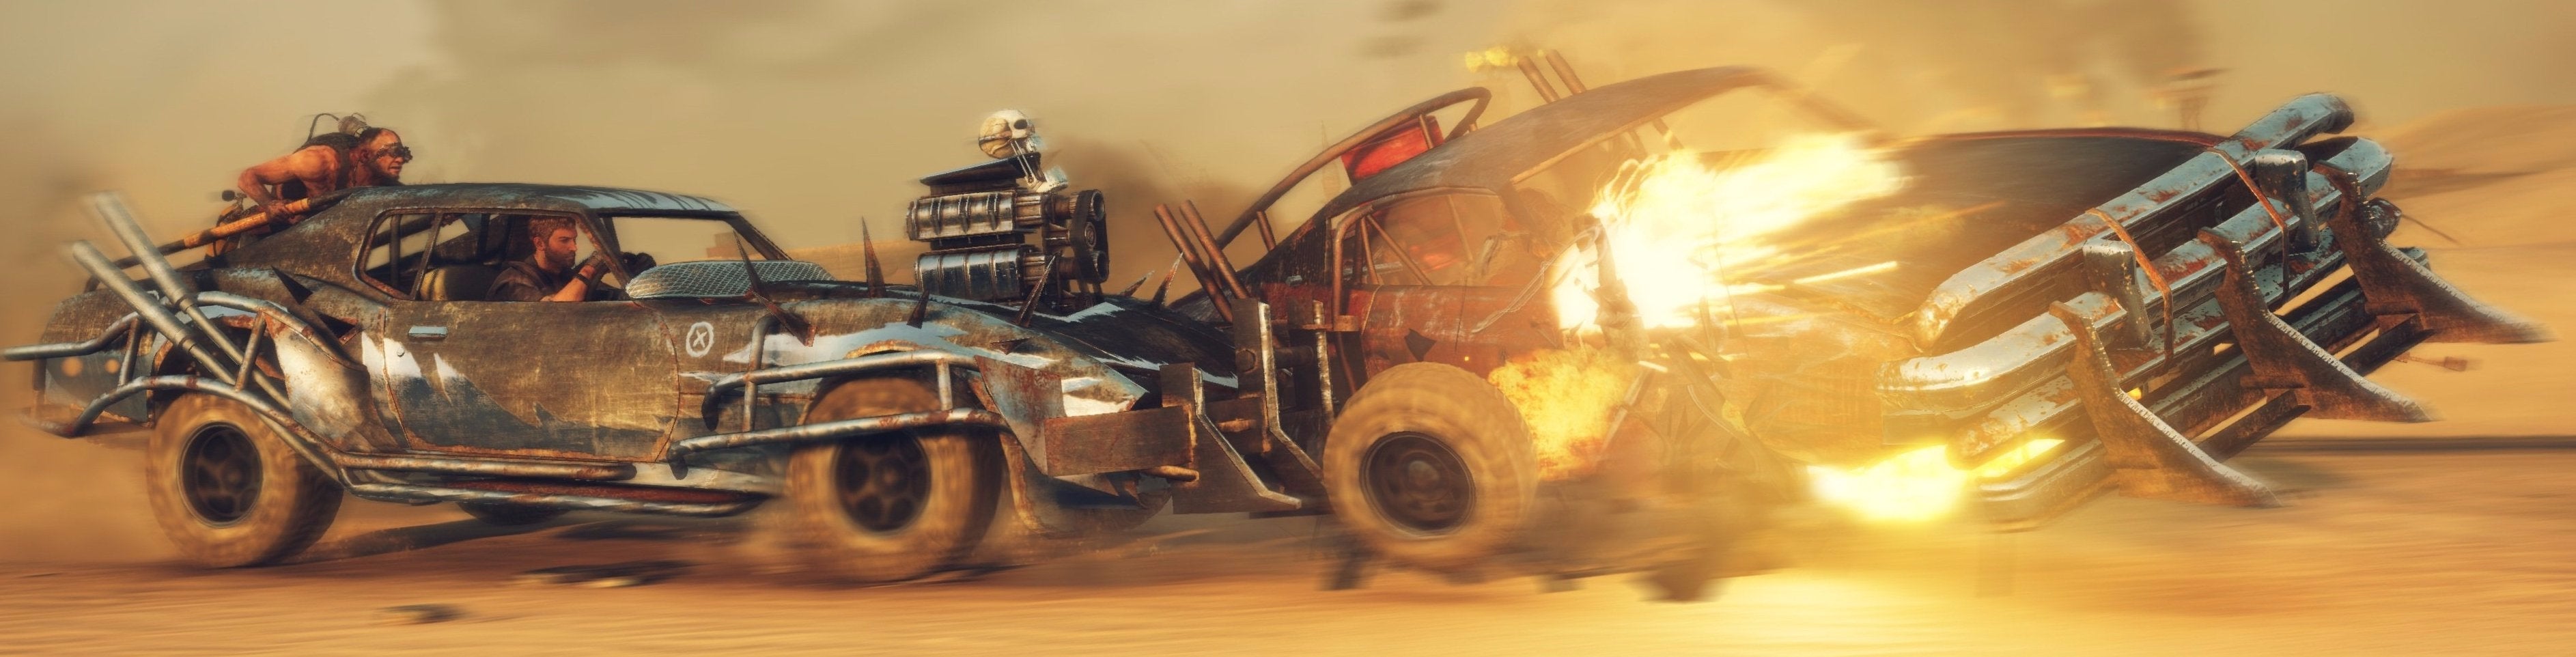 Image for Performance Analysis: Mad Max